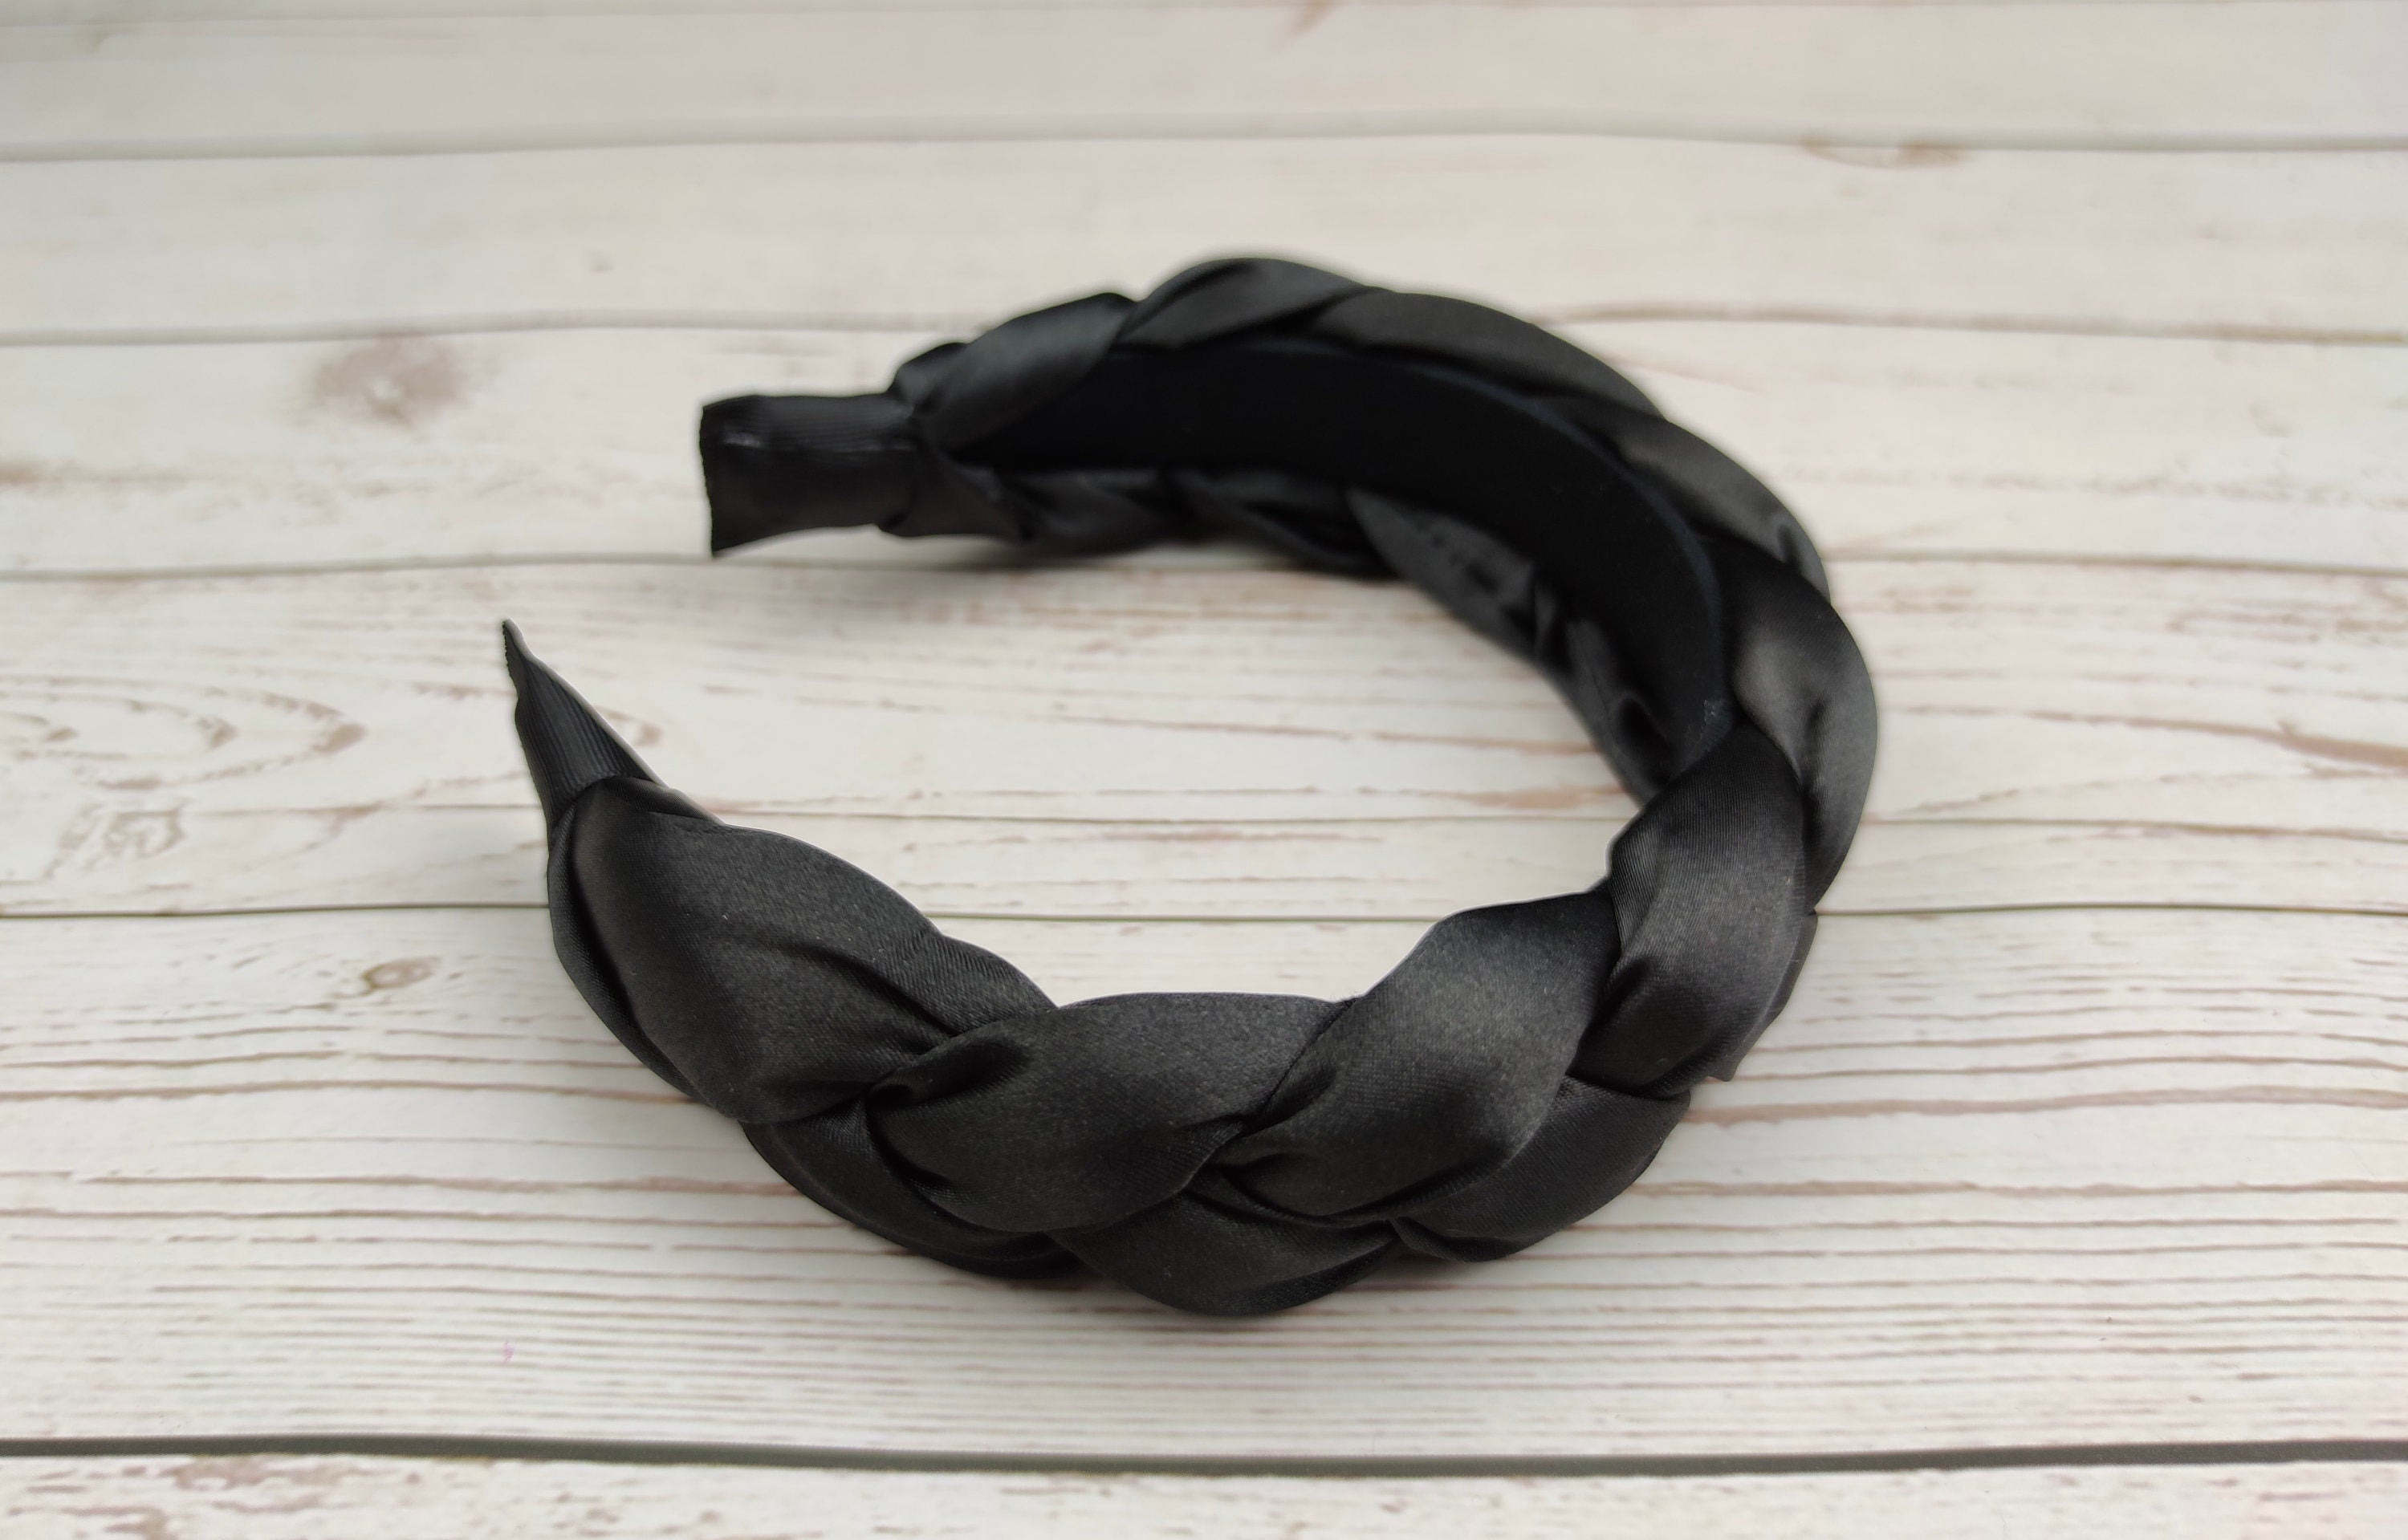 Complete your edgy look with this dark-colored knotted turban hairband, perfect for adding a touch of sophistication to your outfit.